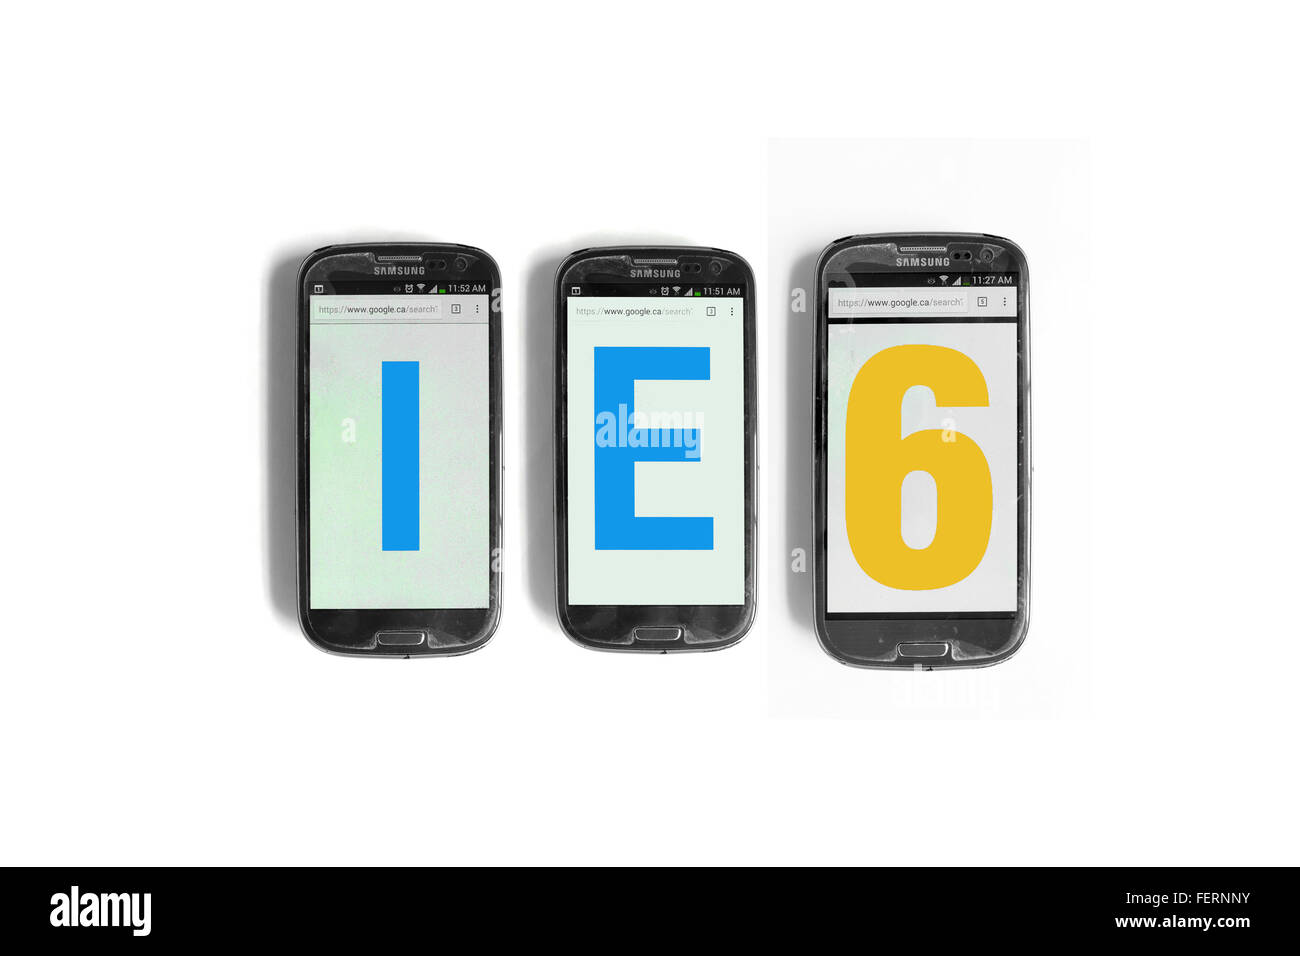 IE6 on the screens of smartphones photographed against a  white background. Stock Photo